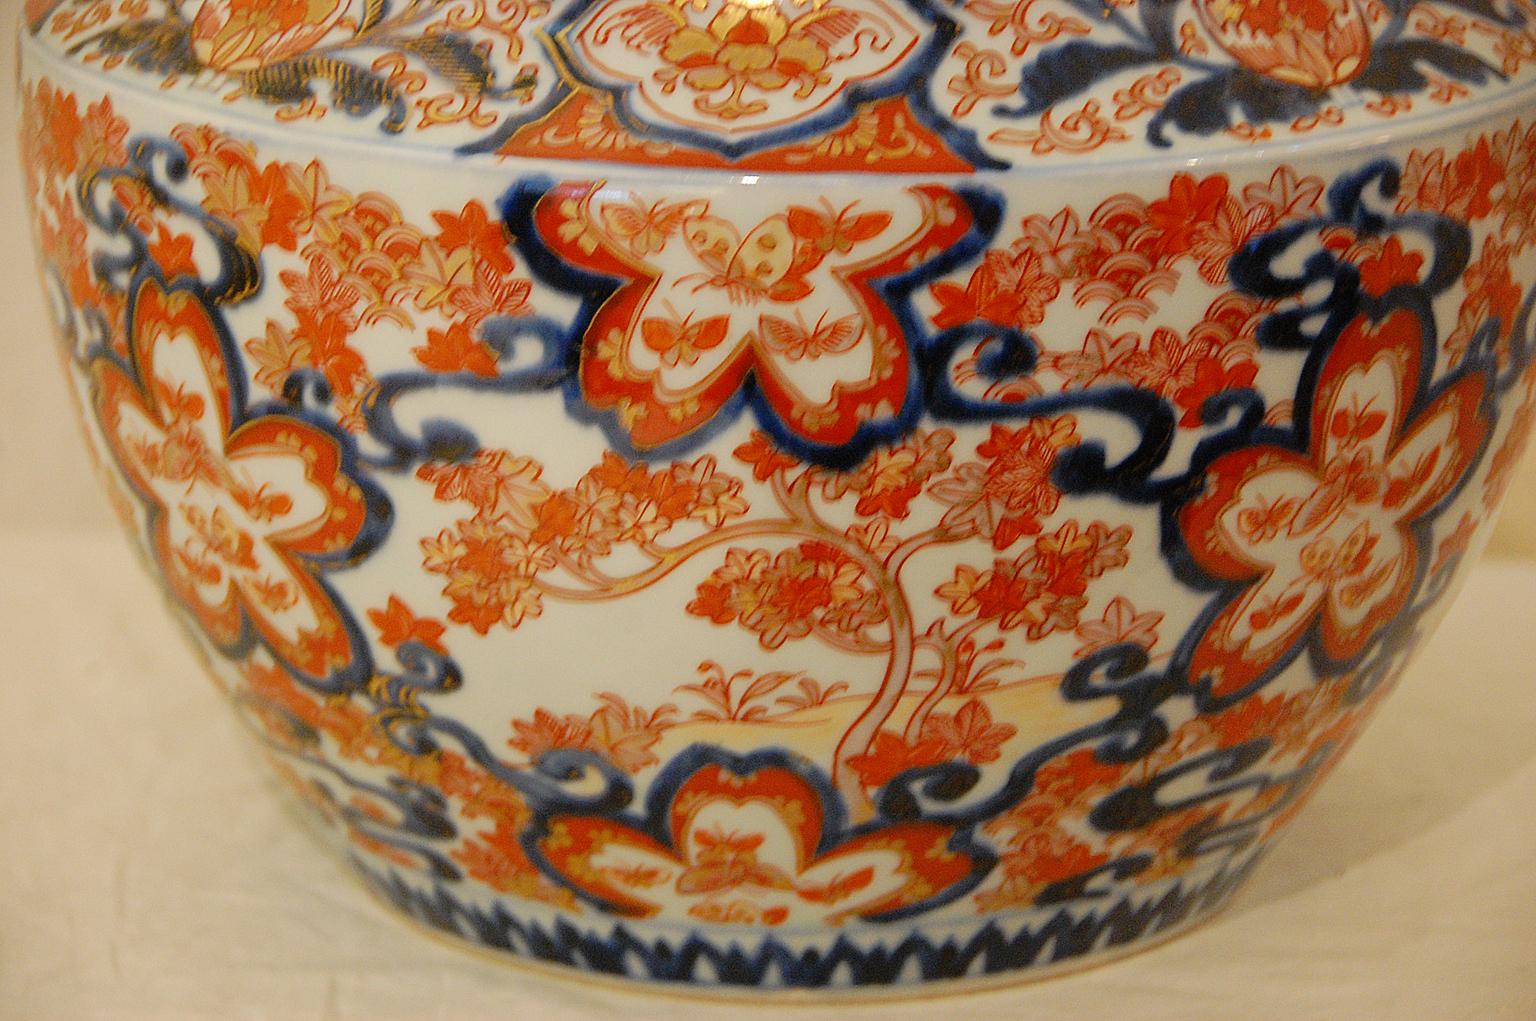 Japanese Meiji period imari jardinière with maple tree and butterfly motifs. This hand painted porcelain has underglaze blue decoration with overglaze enamels in rusts and gold leaf, circa 1870-1880. The diameter of the opening is 9 inches, the